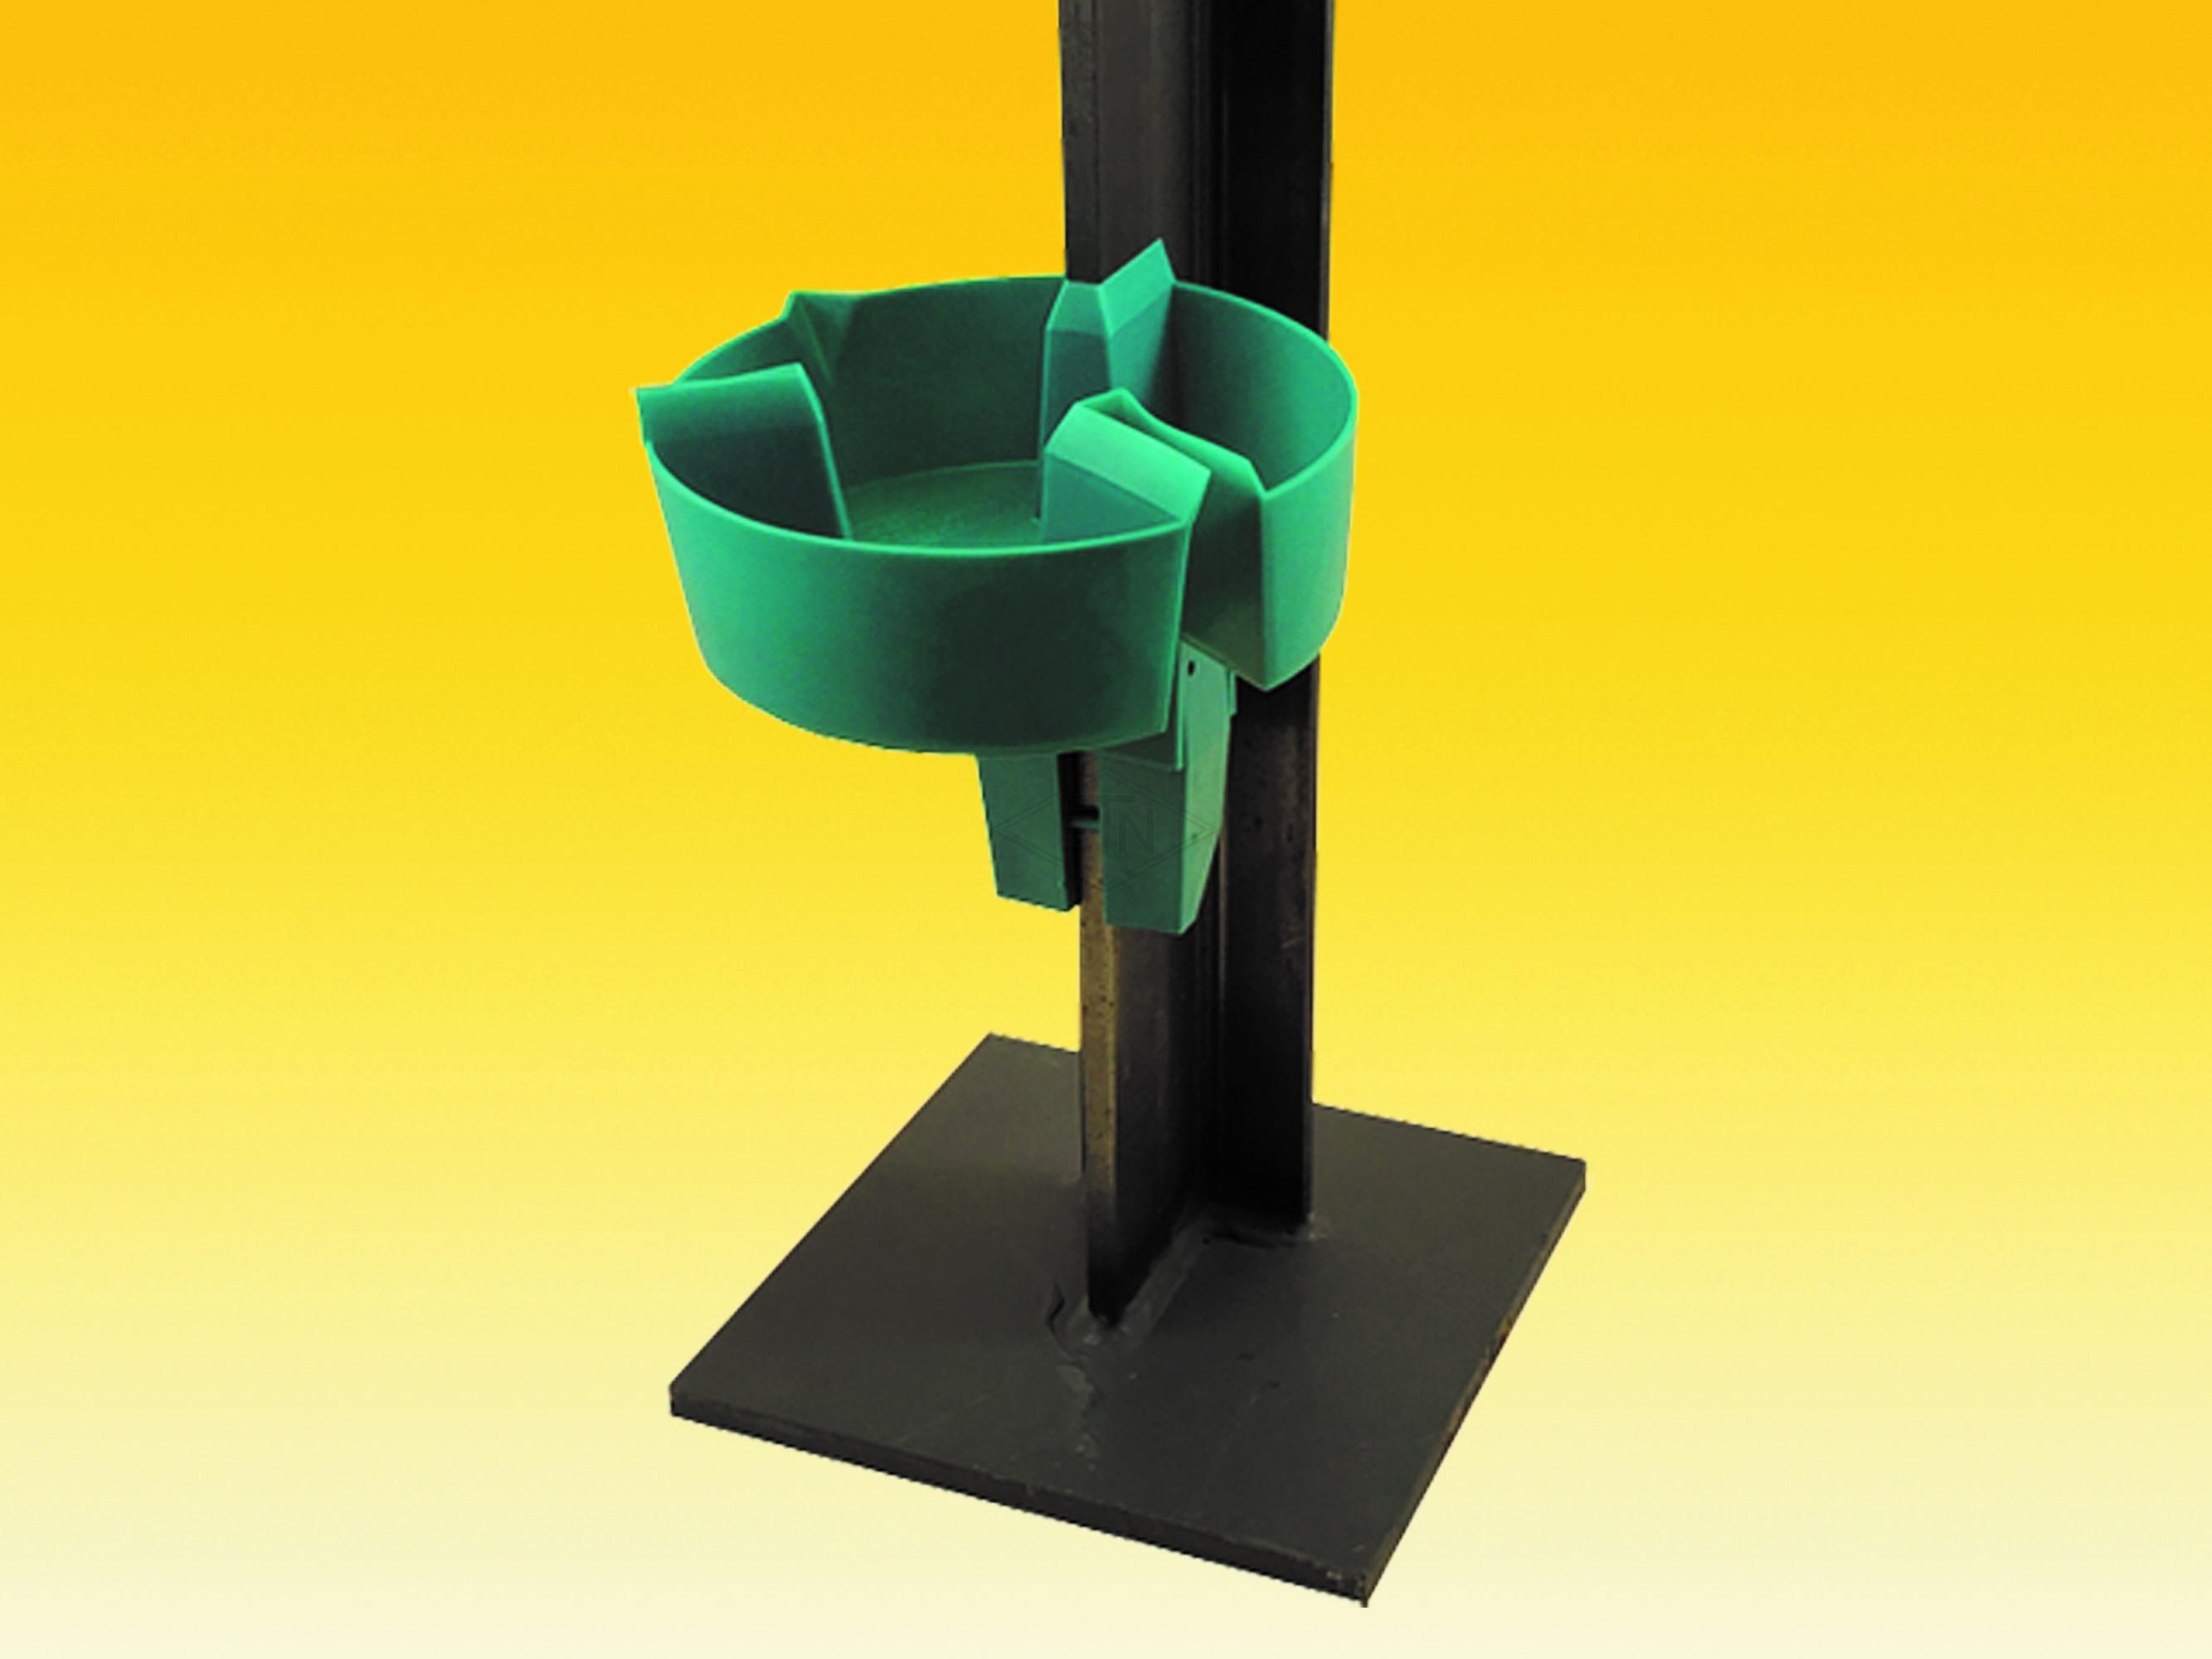 Holding system for Oil collecting pots round, magnetic holder and plattform, with sticking material, for fixation on the rails